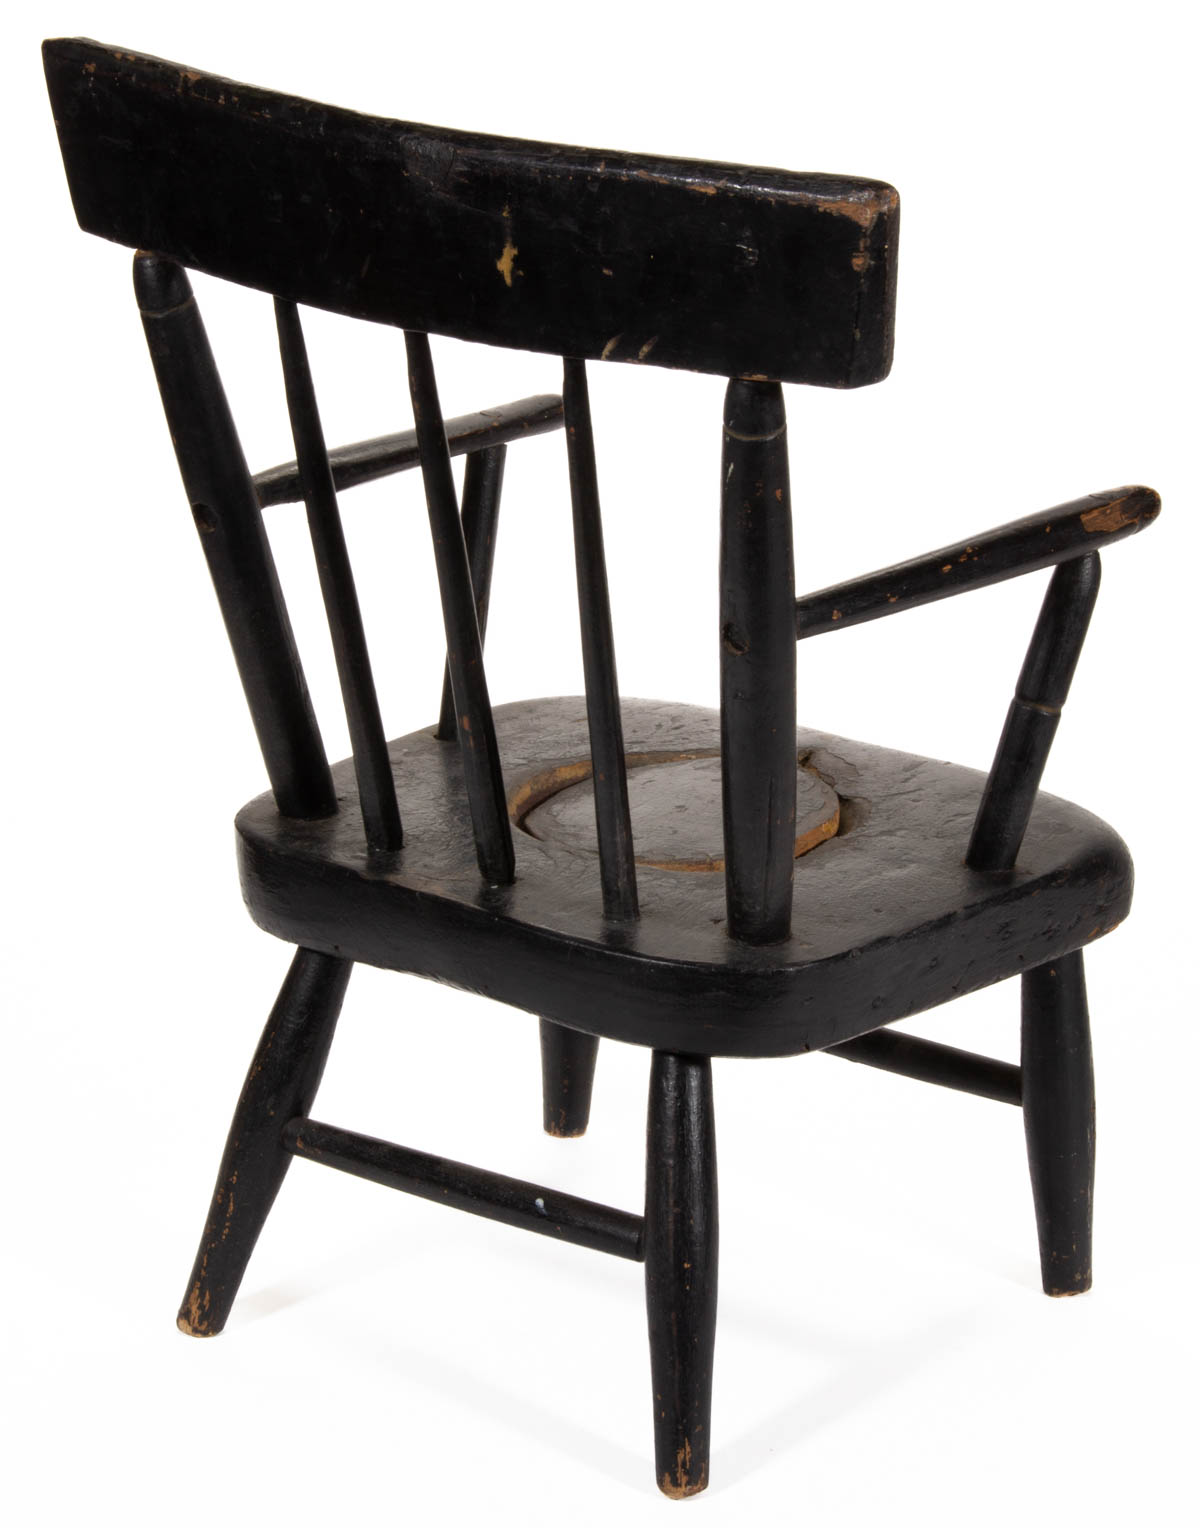 HAMPSHIRE COUNTY, VIRGINIA (NOW WEST VIRGINIA) PAINTED WINDSOR CHILD’S NECESSARY CHAIR